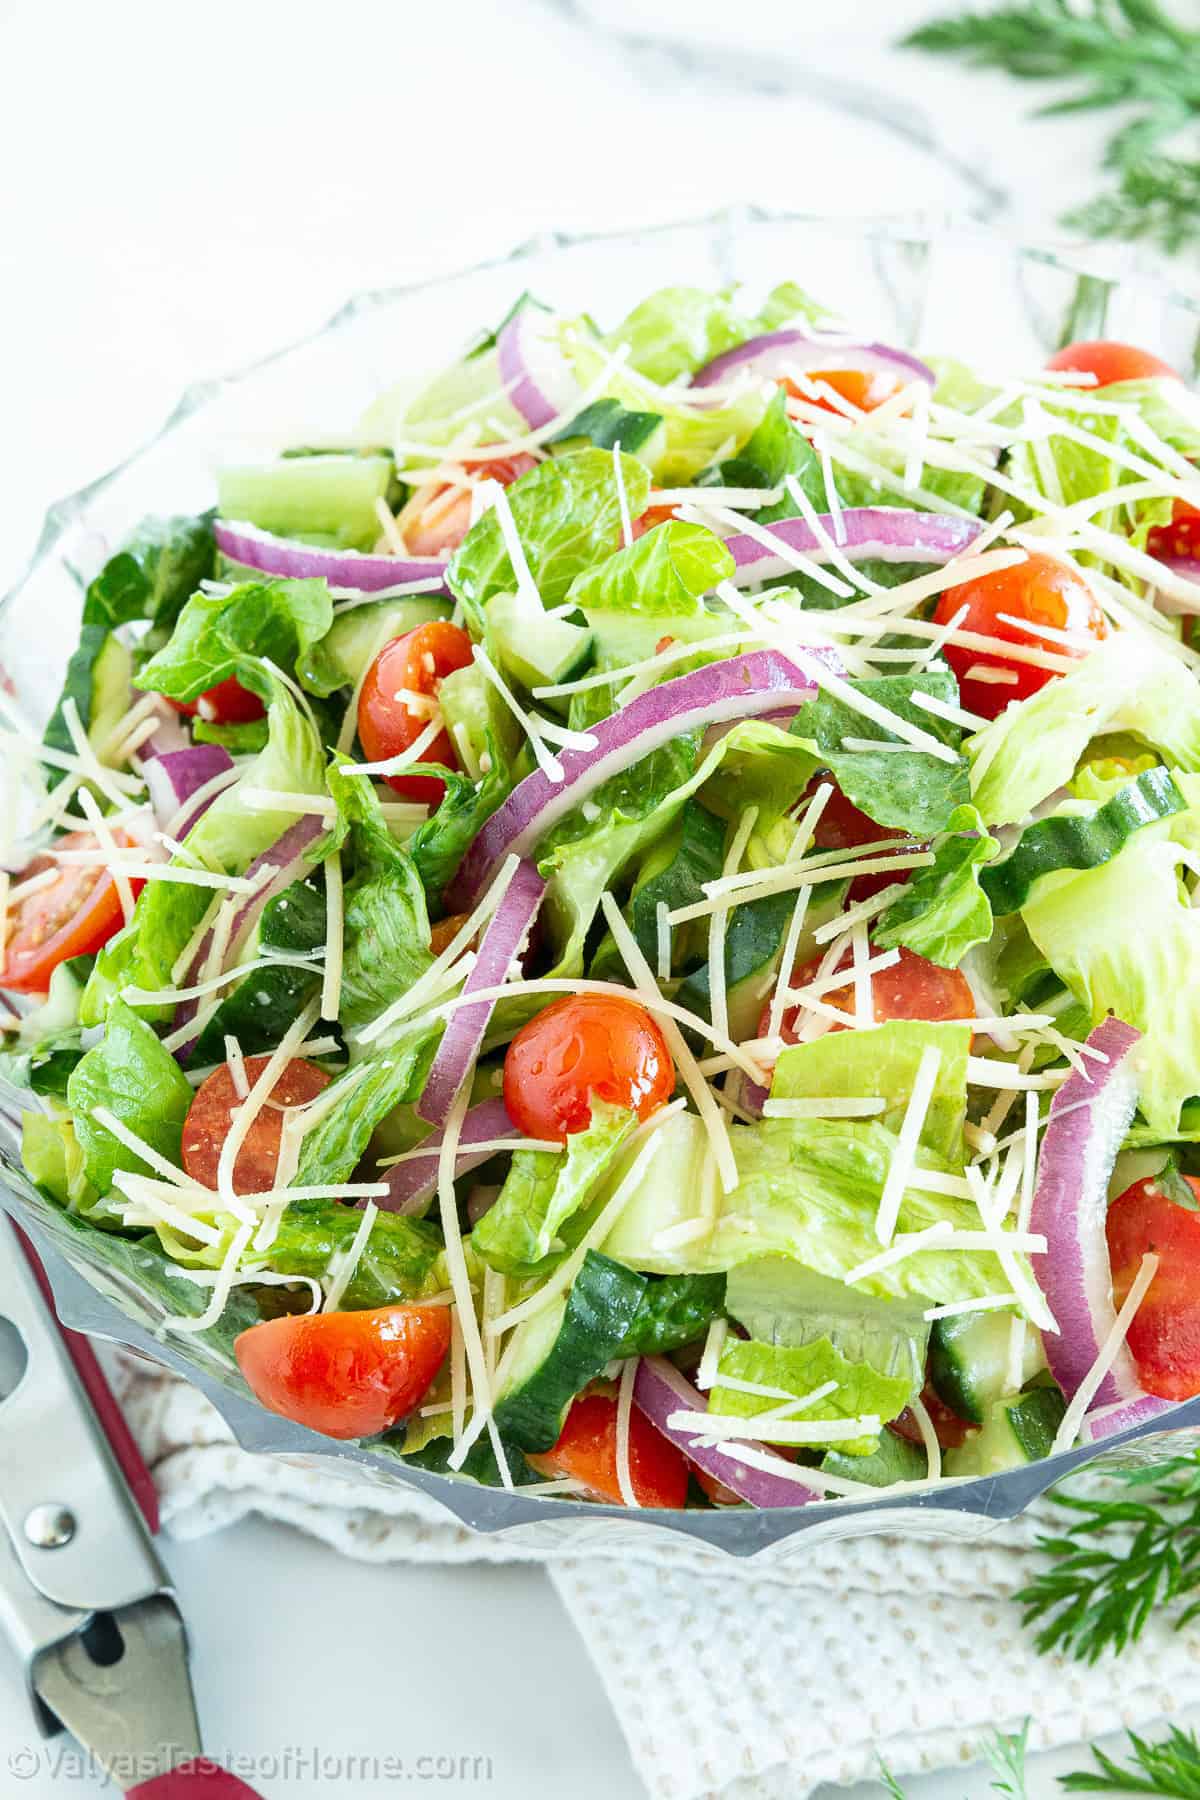 This salad is the easiest and the fastest salad you can throw together. Vegetables can be precut ahead of time and stored in the fridge until ready to serve. The taste and the flavor are phenomenal! 